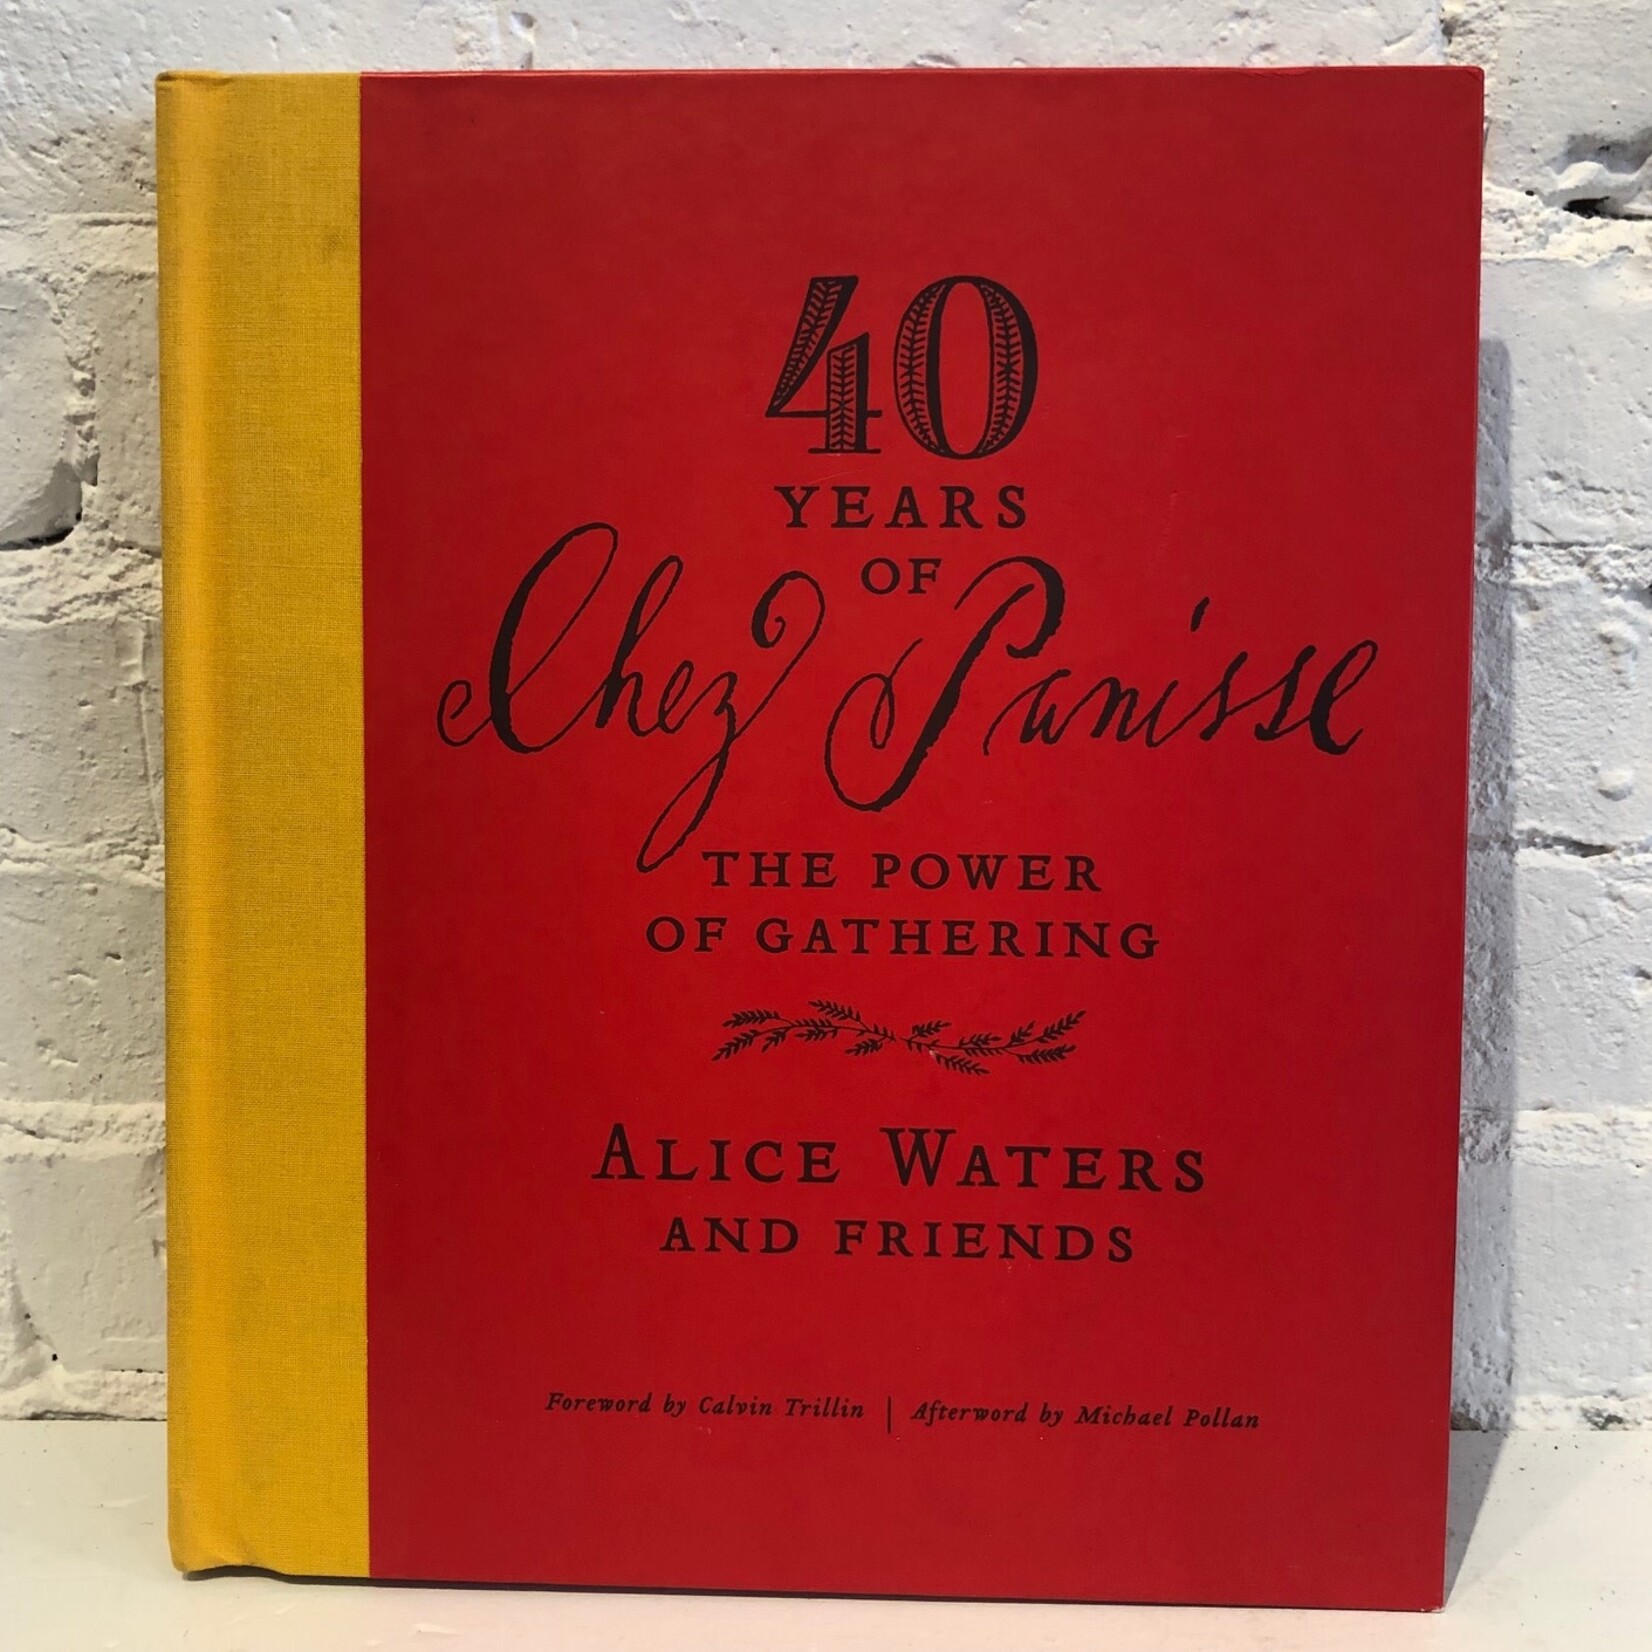 40 Years of Chez Panisse: The Power of Gathering by Alice Waters